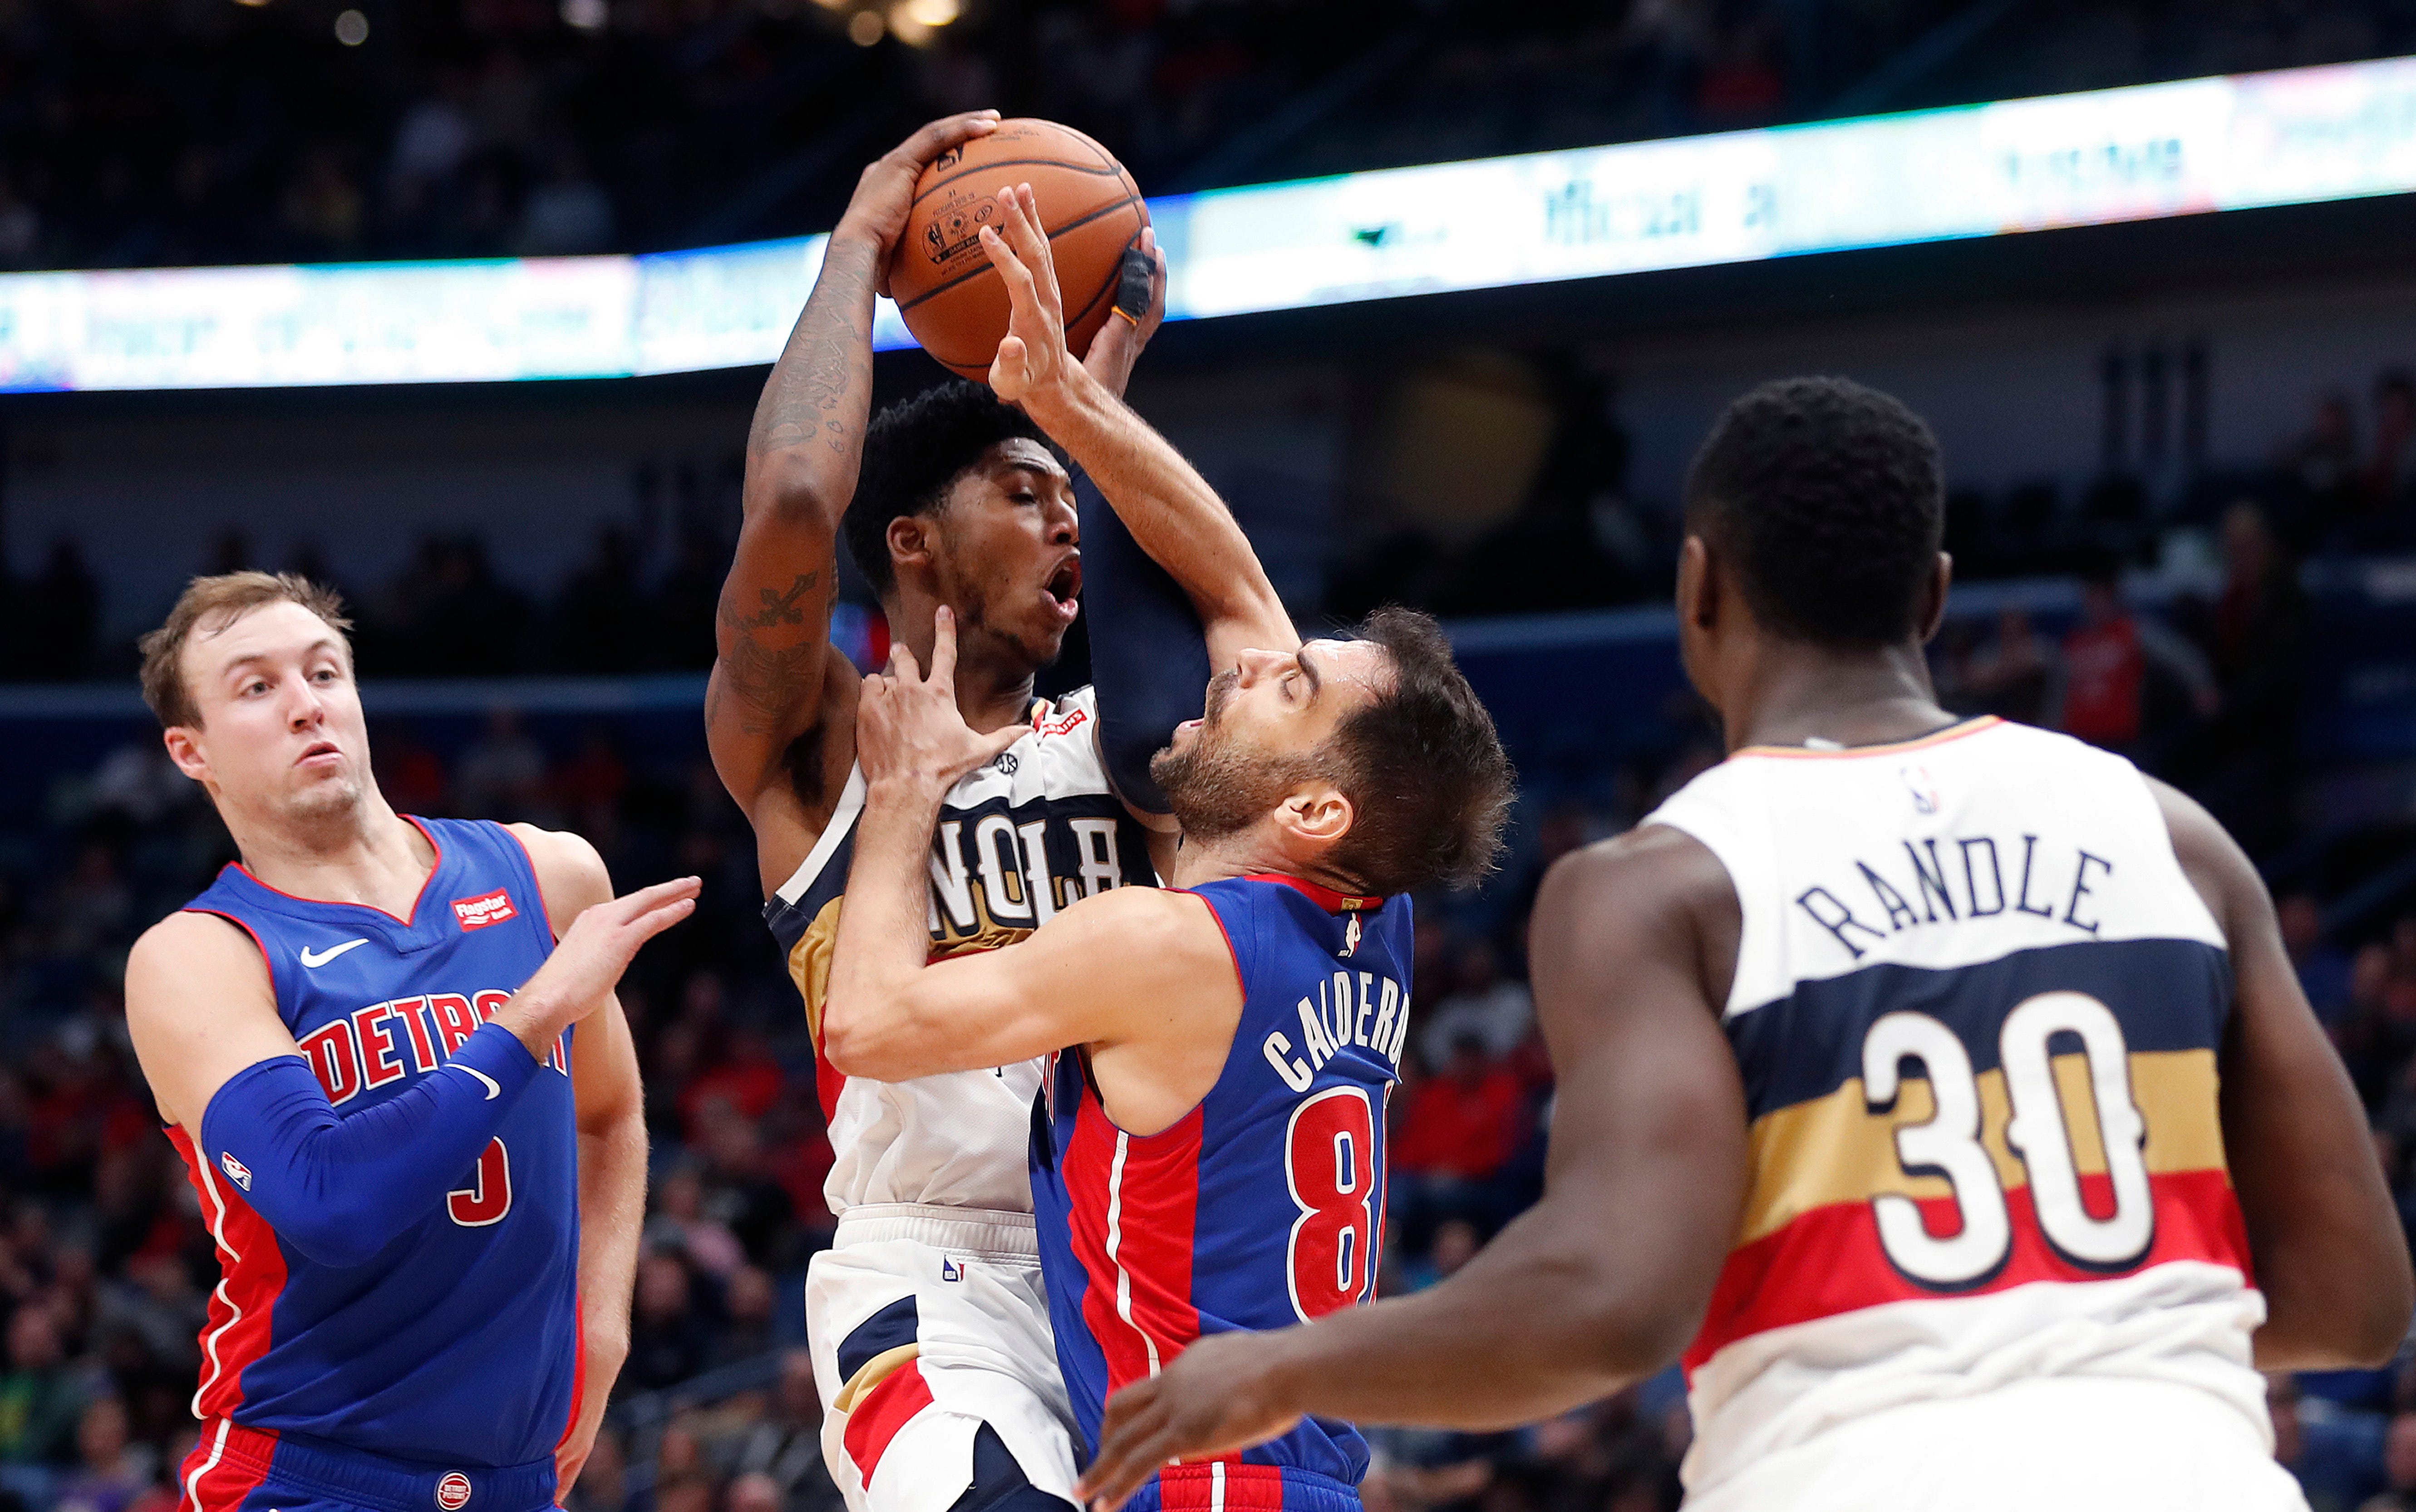 New Orleans Pelicans guard Elfrid Payton drives to the basket between Detroit Pistons guard Jose Calderon and guard Luke Kennard (5) in the second half.